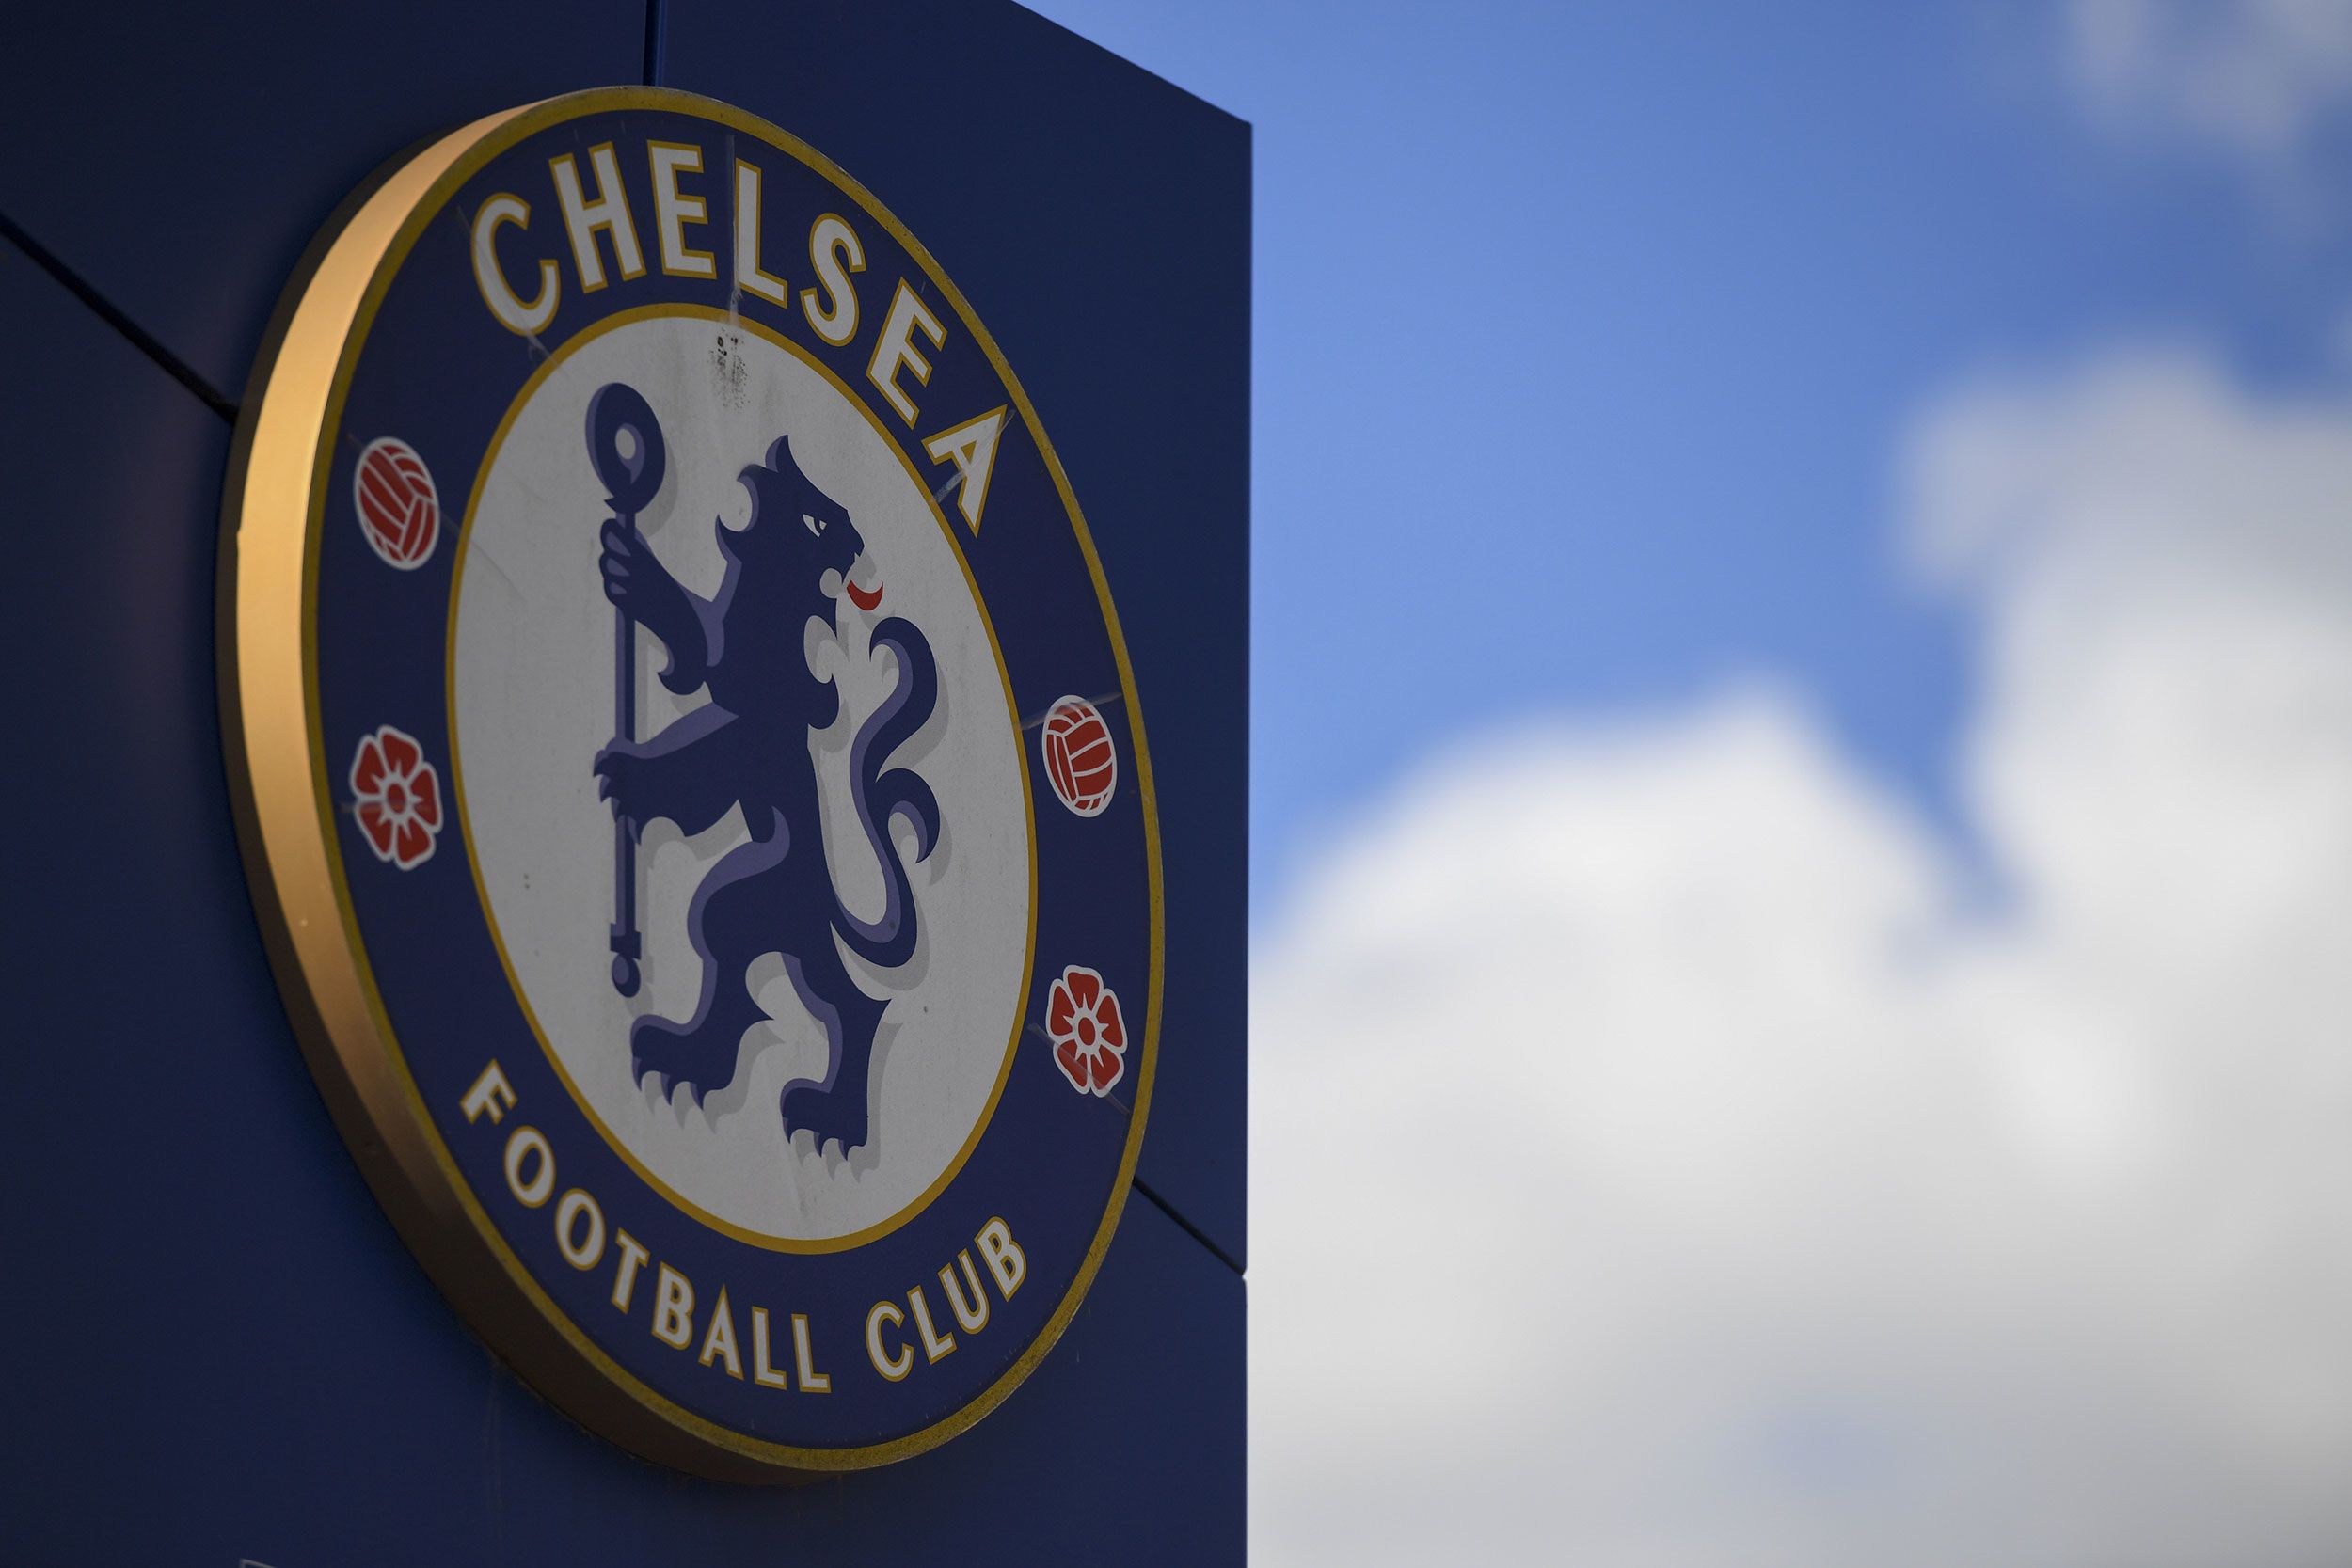 There are growing whispers of EPL clubs plotting against Chelsea